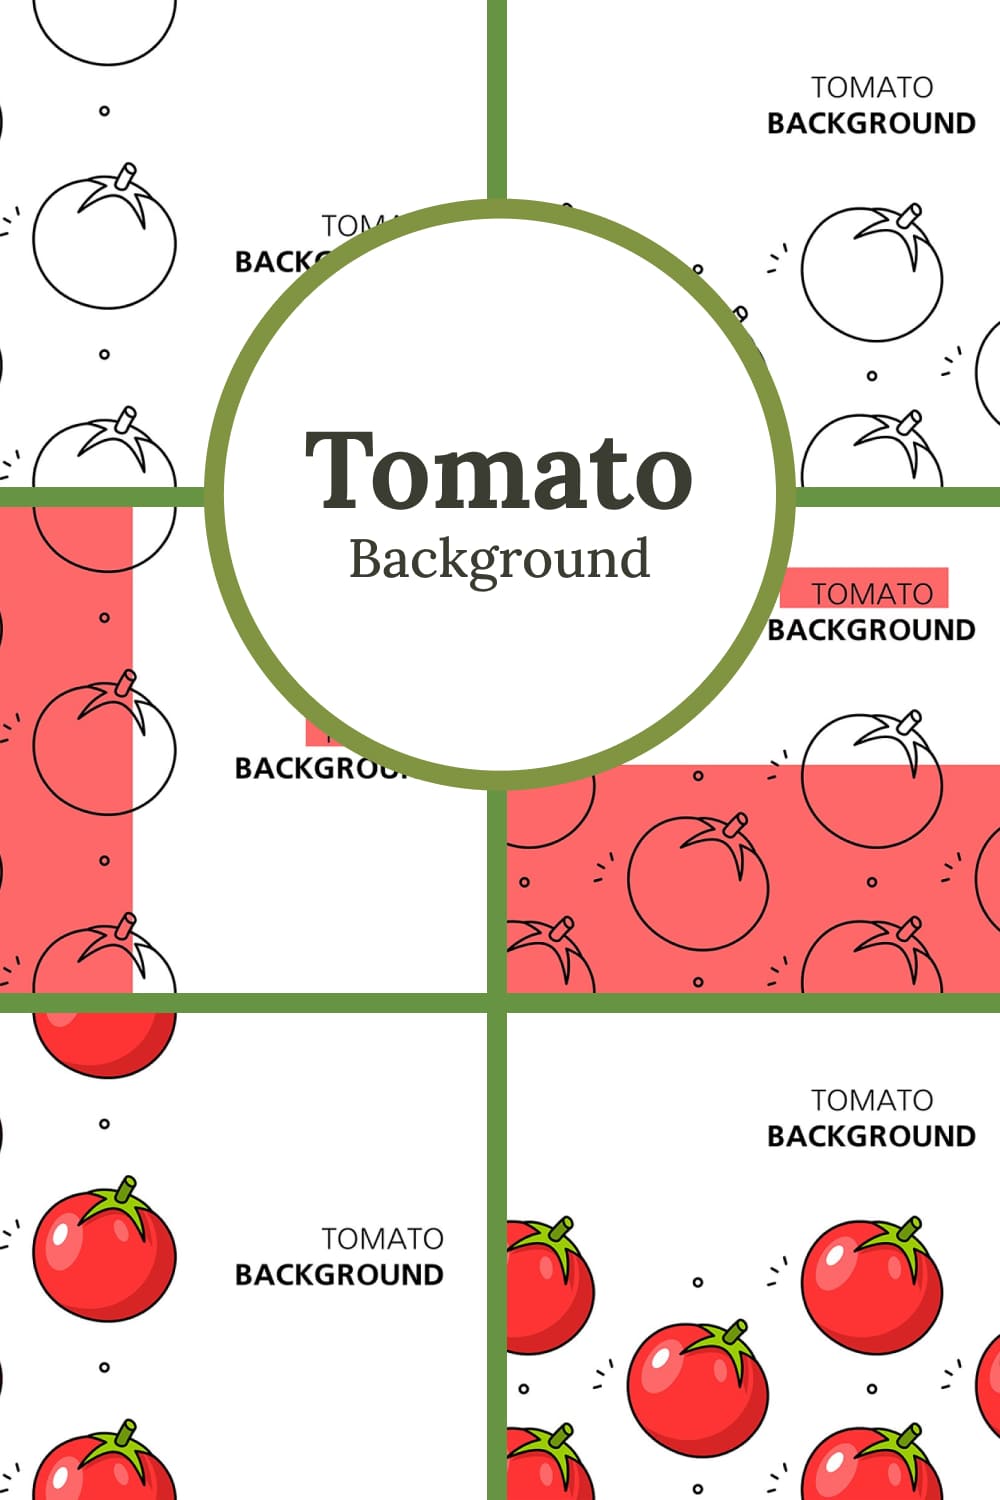 Tomato background - pinterest image preview.